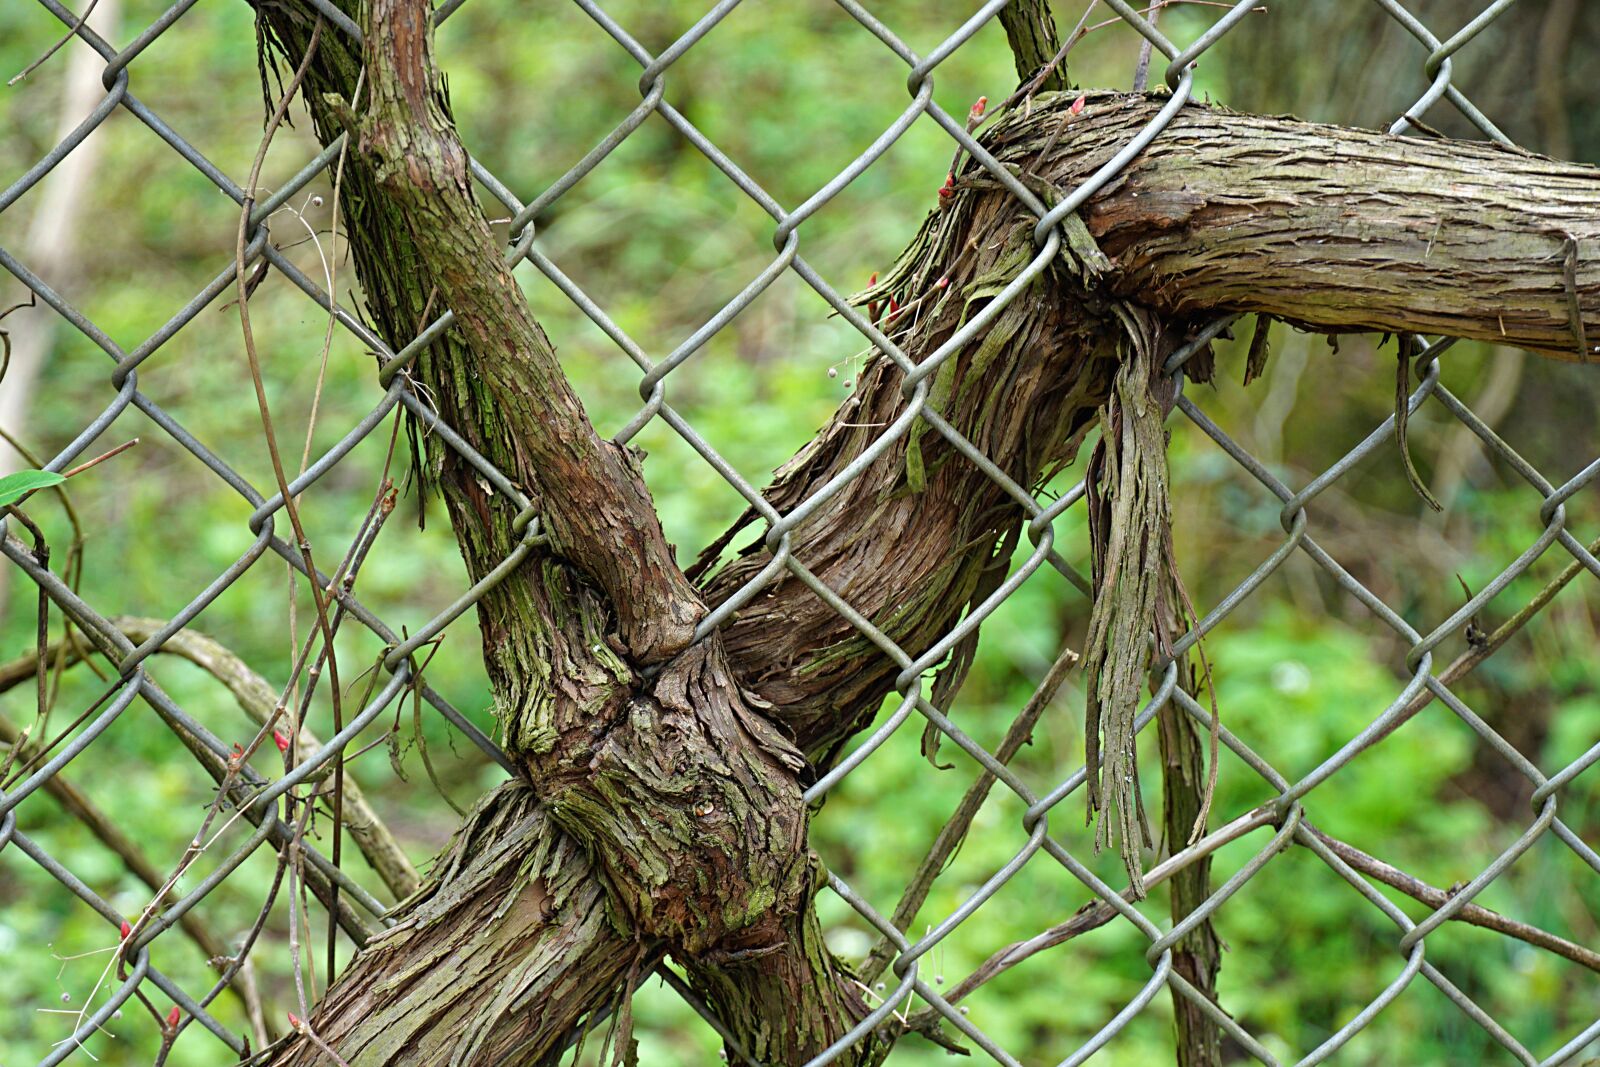 Sony a6000 sample photo. Roots, fence, outdoors photography